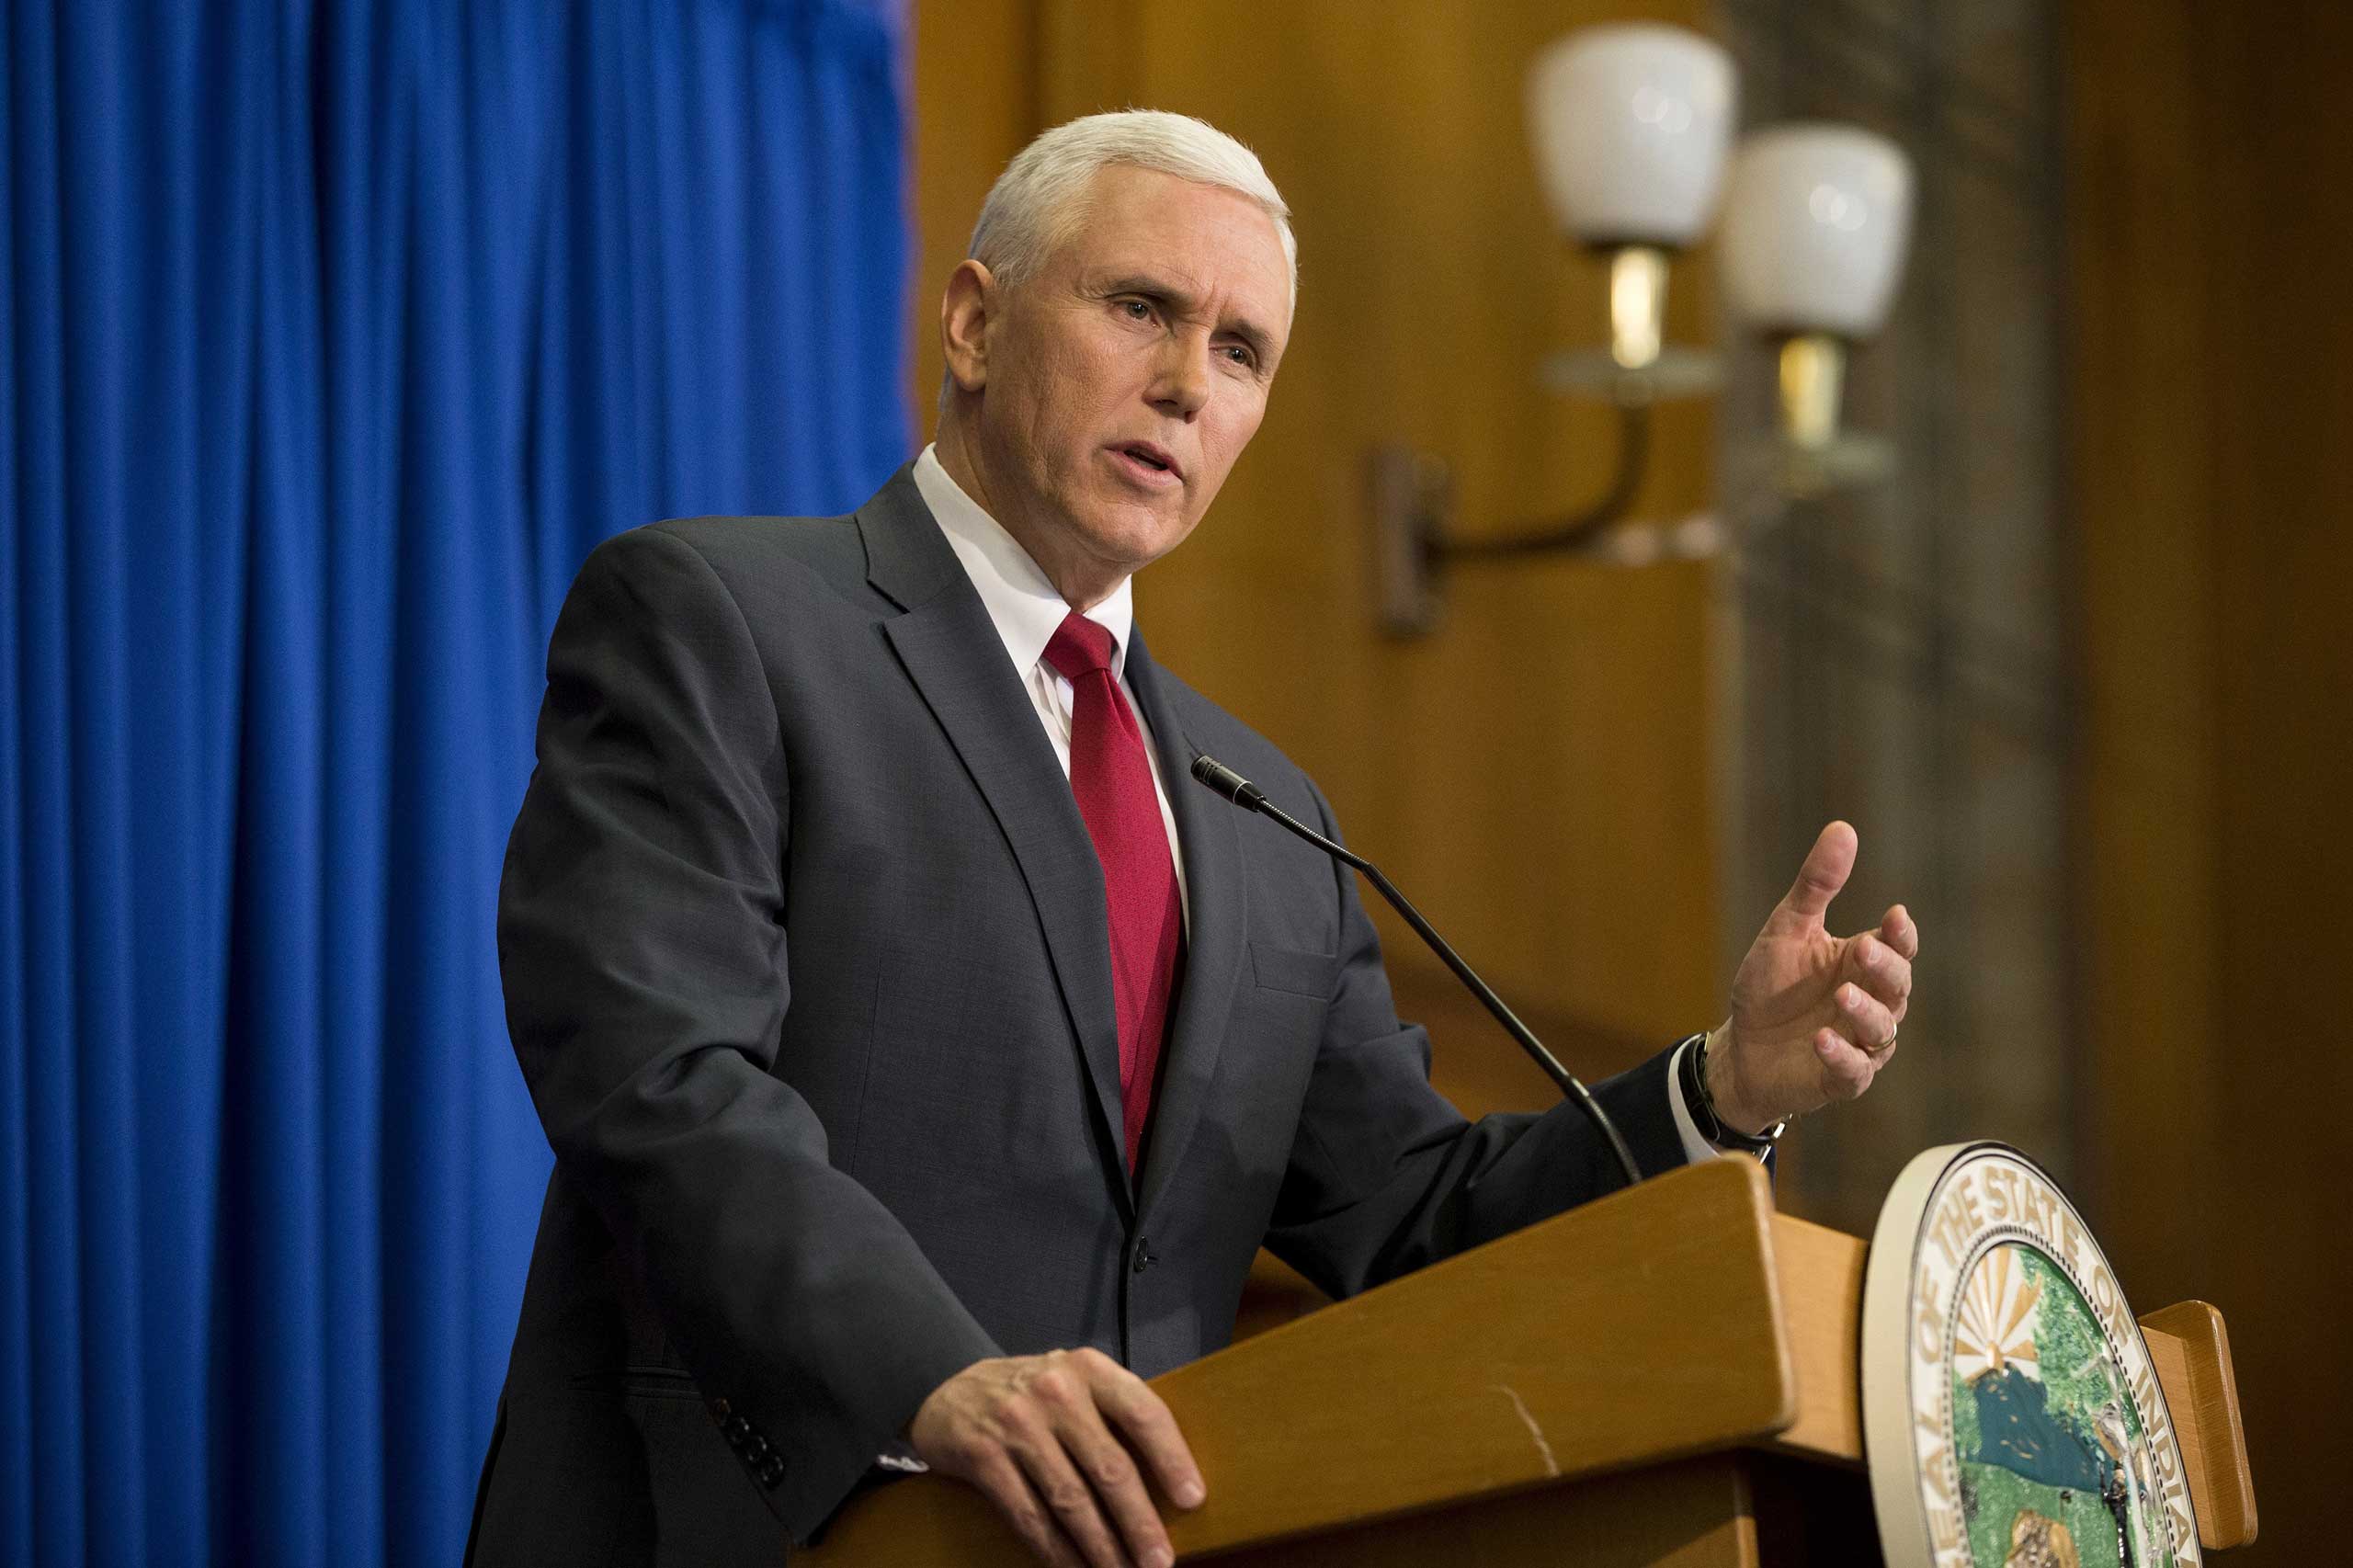 Indiana Gov. Mike Pence speaks during a press conference at the Indiana State Library in Indianapolis on March 31, 2015. (Aaron P. Bernstein—Getty Images)